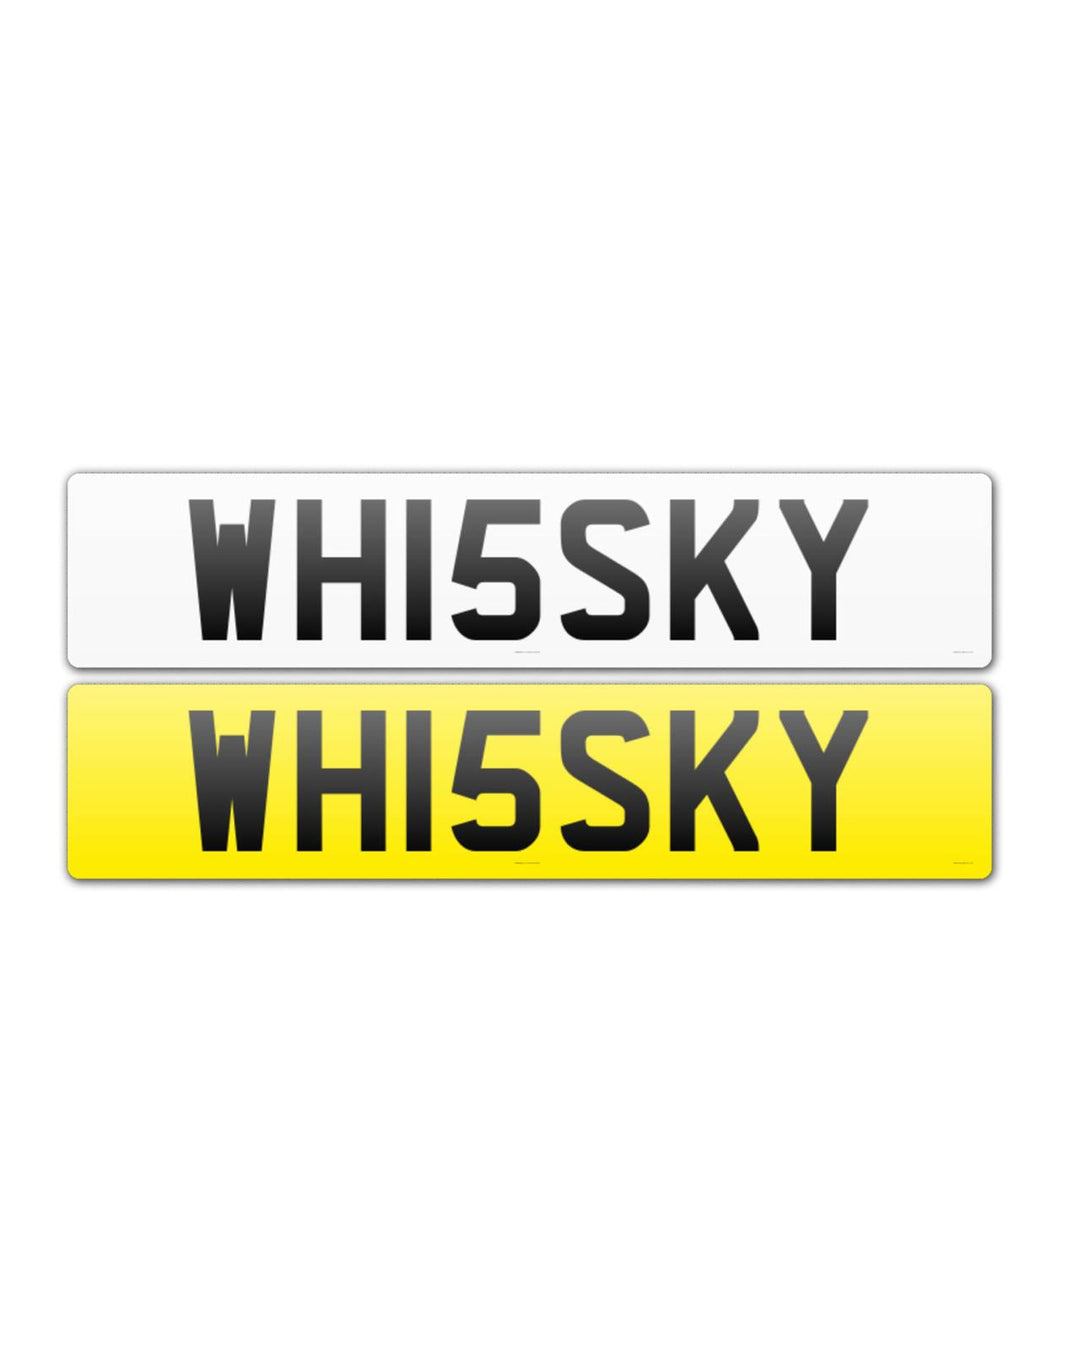 whisky number plate WH15 SKY